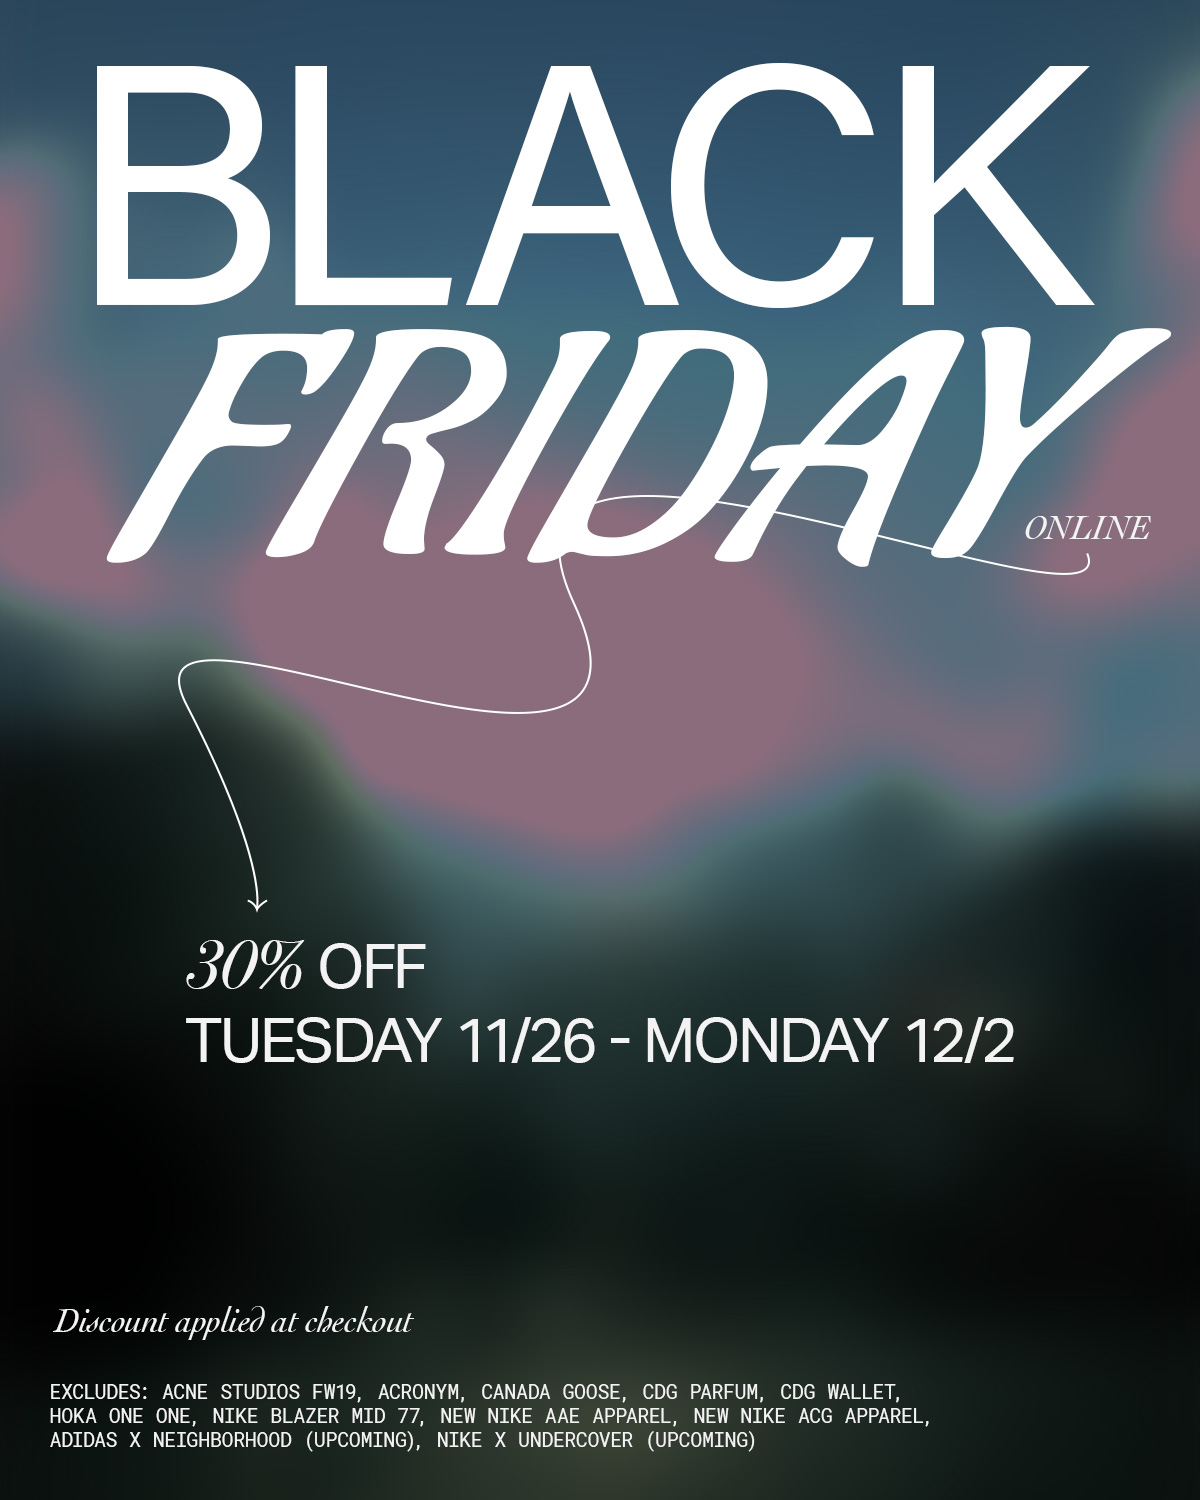 Notre on Twitter: "Our Black Friday promo begins today and runs Monday 12/02. Take 30% off online purchases—discount applied at checkout. Some exclusions / Twitter